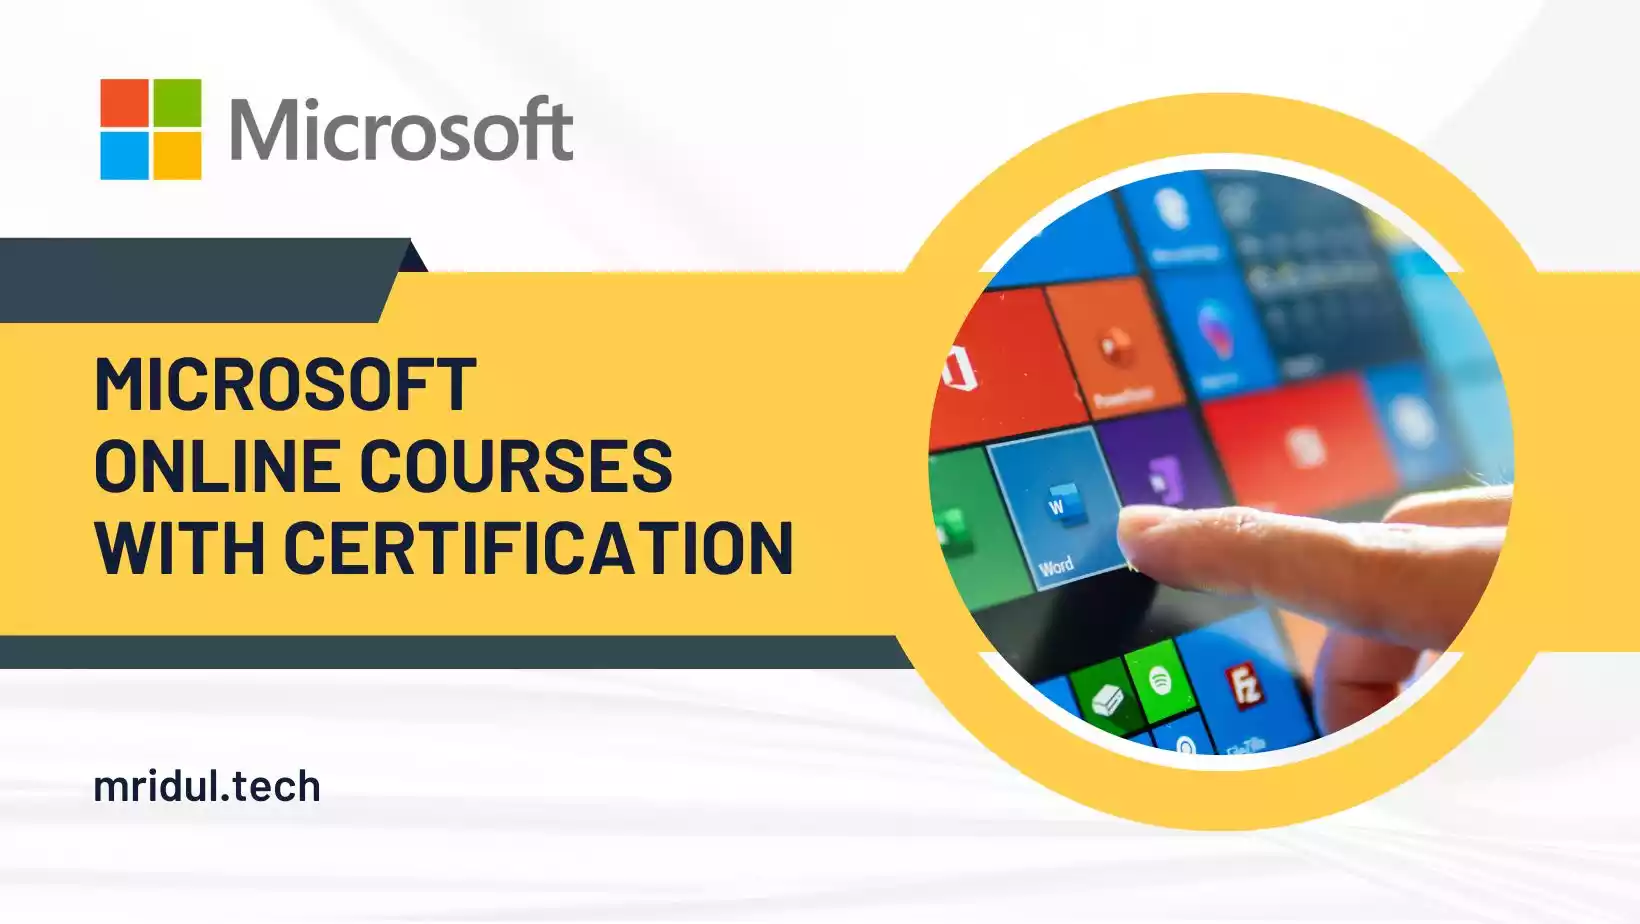 10 FREE Microsoft online courses with certification